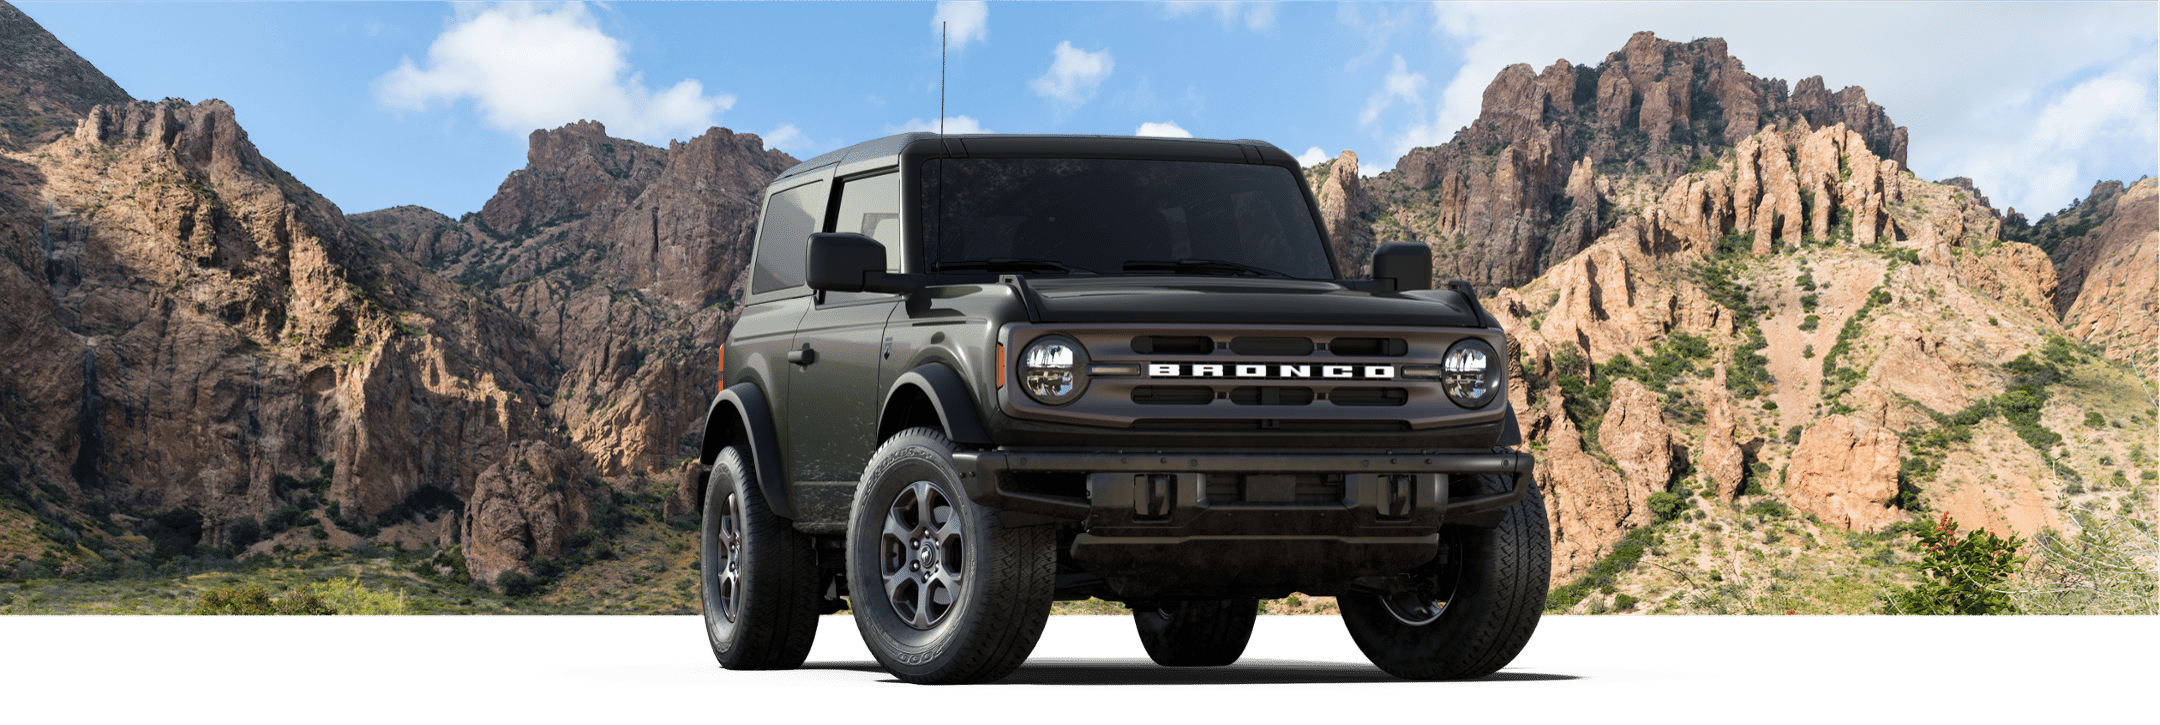 2021 ford bronco for sale penticton bc